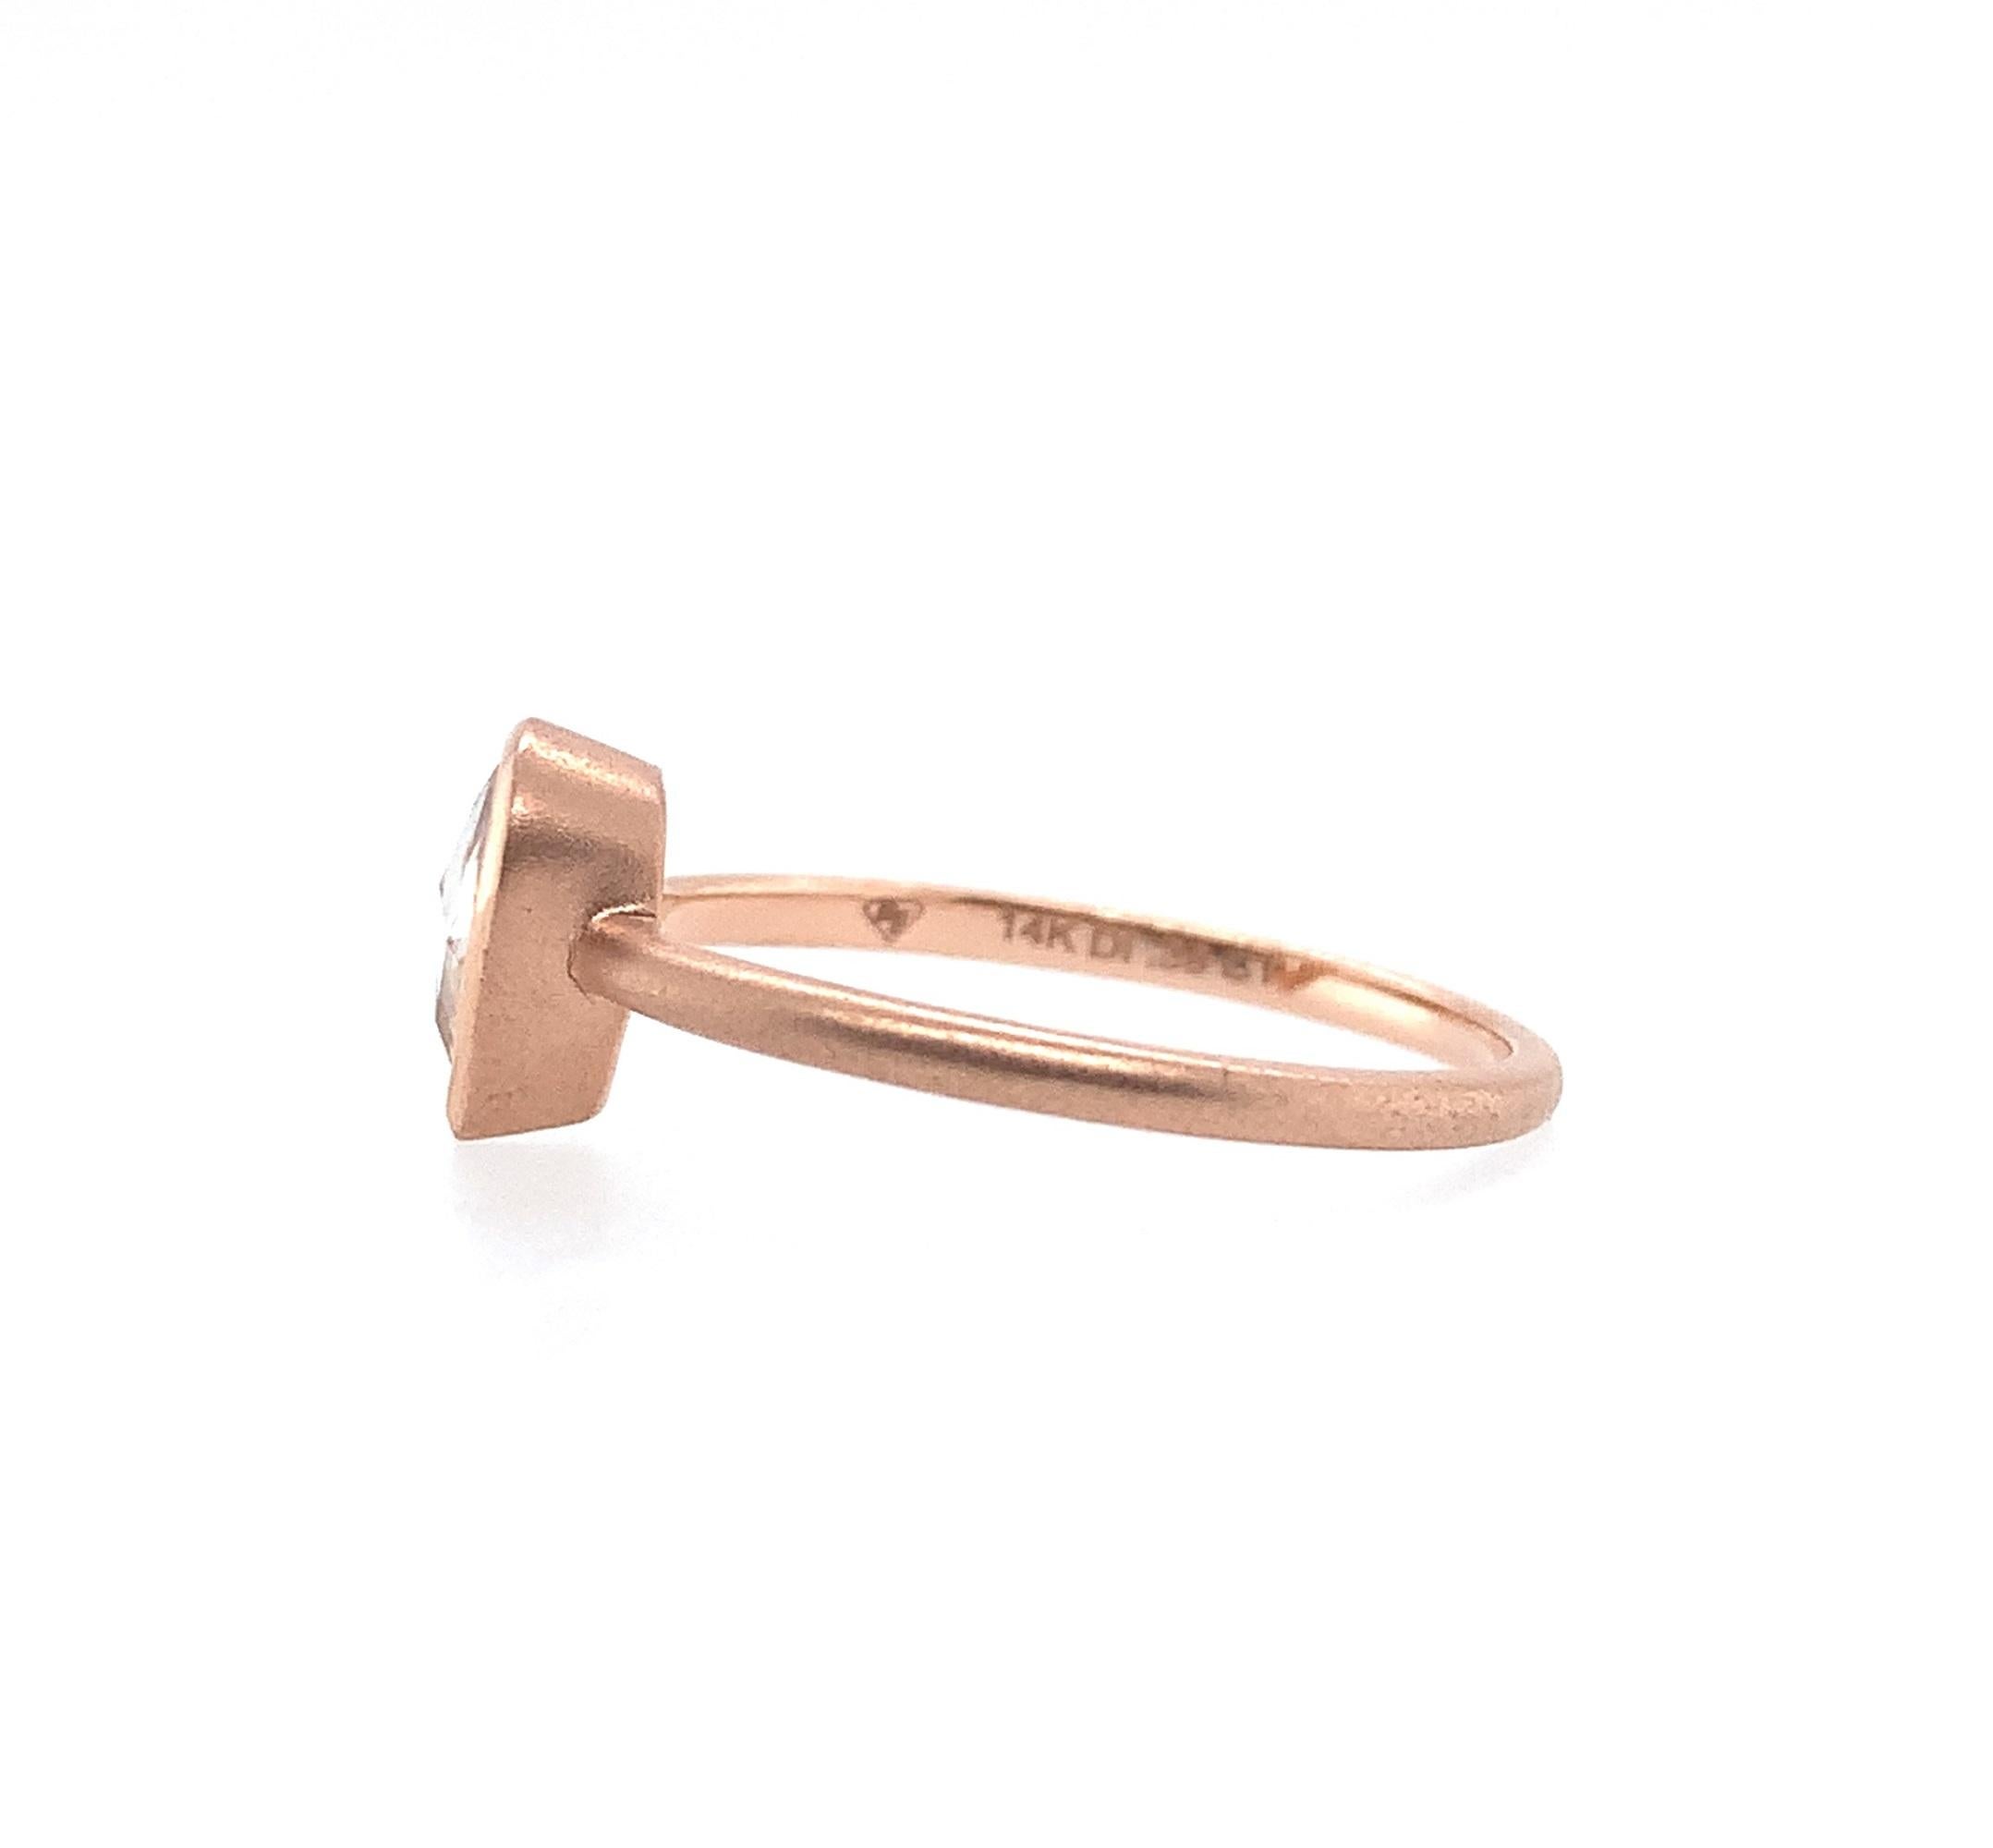 14K rose gold ring featuring a bezel set rose cut pear shape diamond. The diamond has light champagne color and measures about 6.1mm x 4.5mm. The ring fits a size 6.25 finger and weighs 1.09dwt. It is contemporary and has a brushed finish.